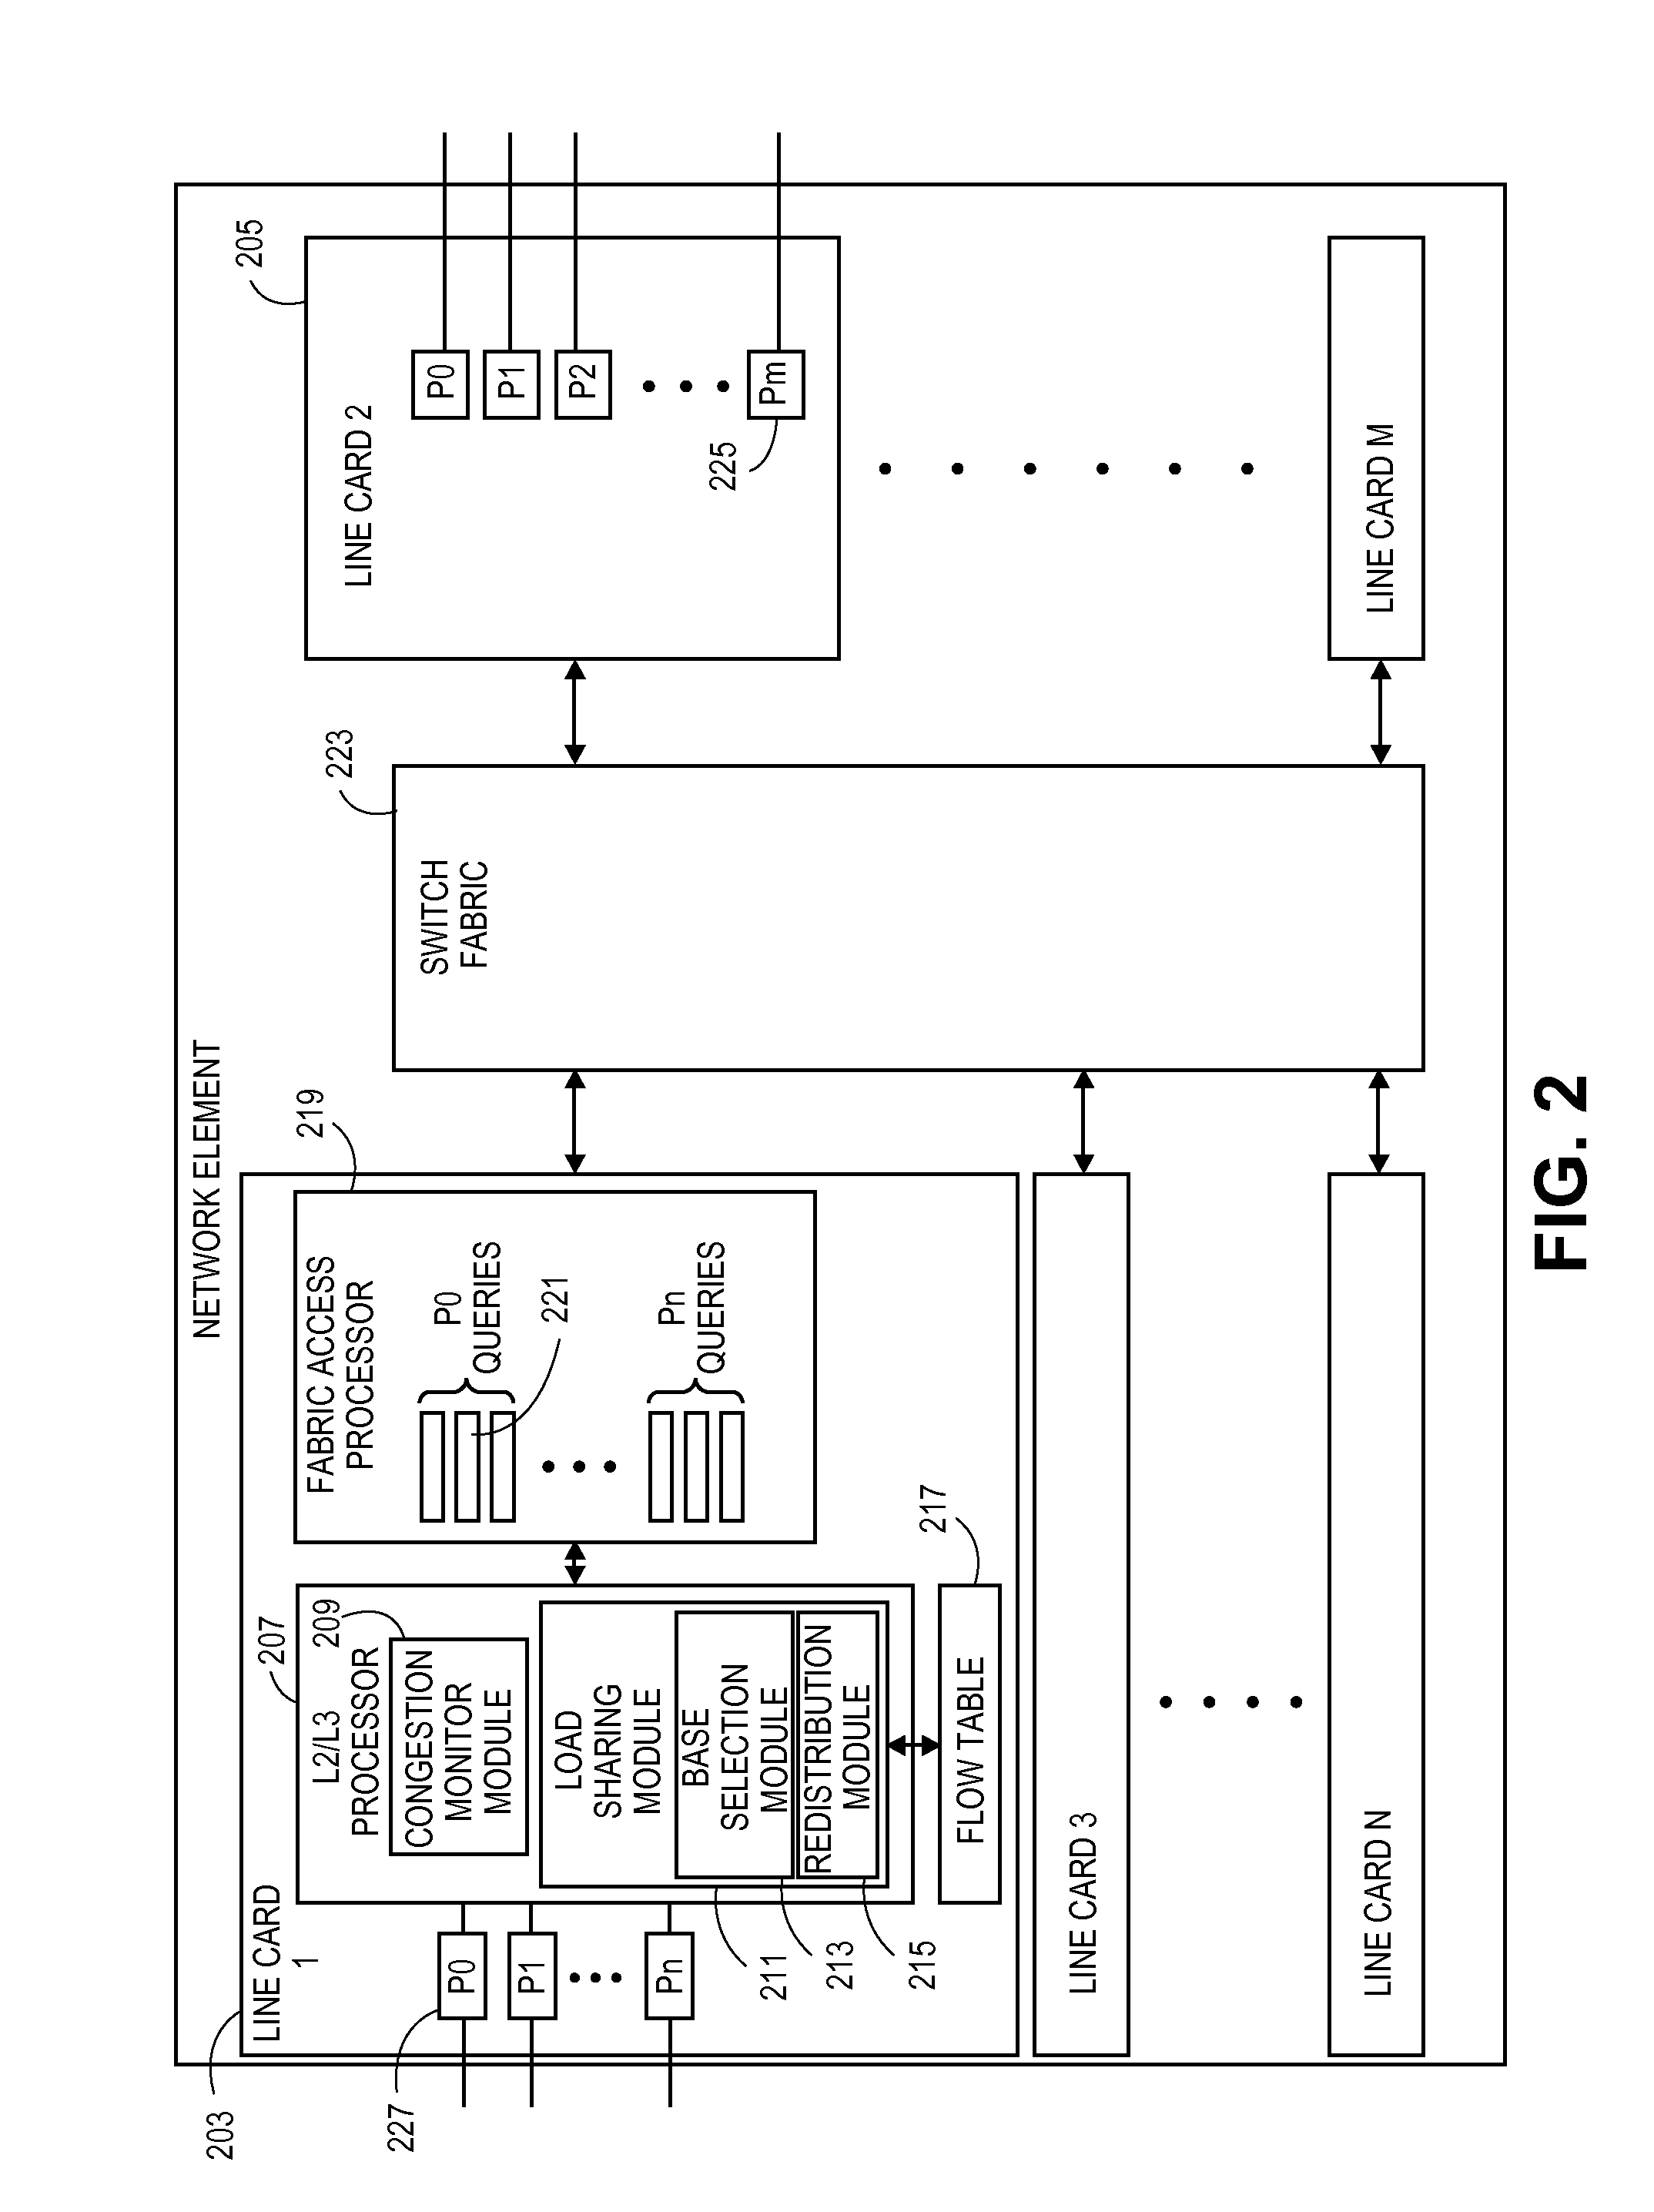 Method for dynamic load balancing of network flows on lag interfaces